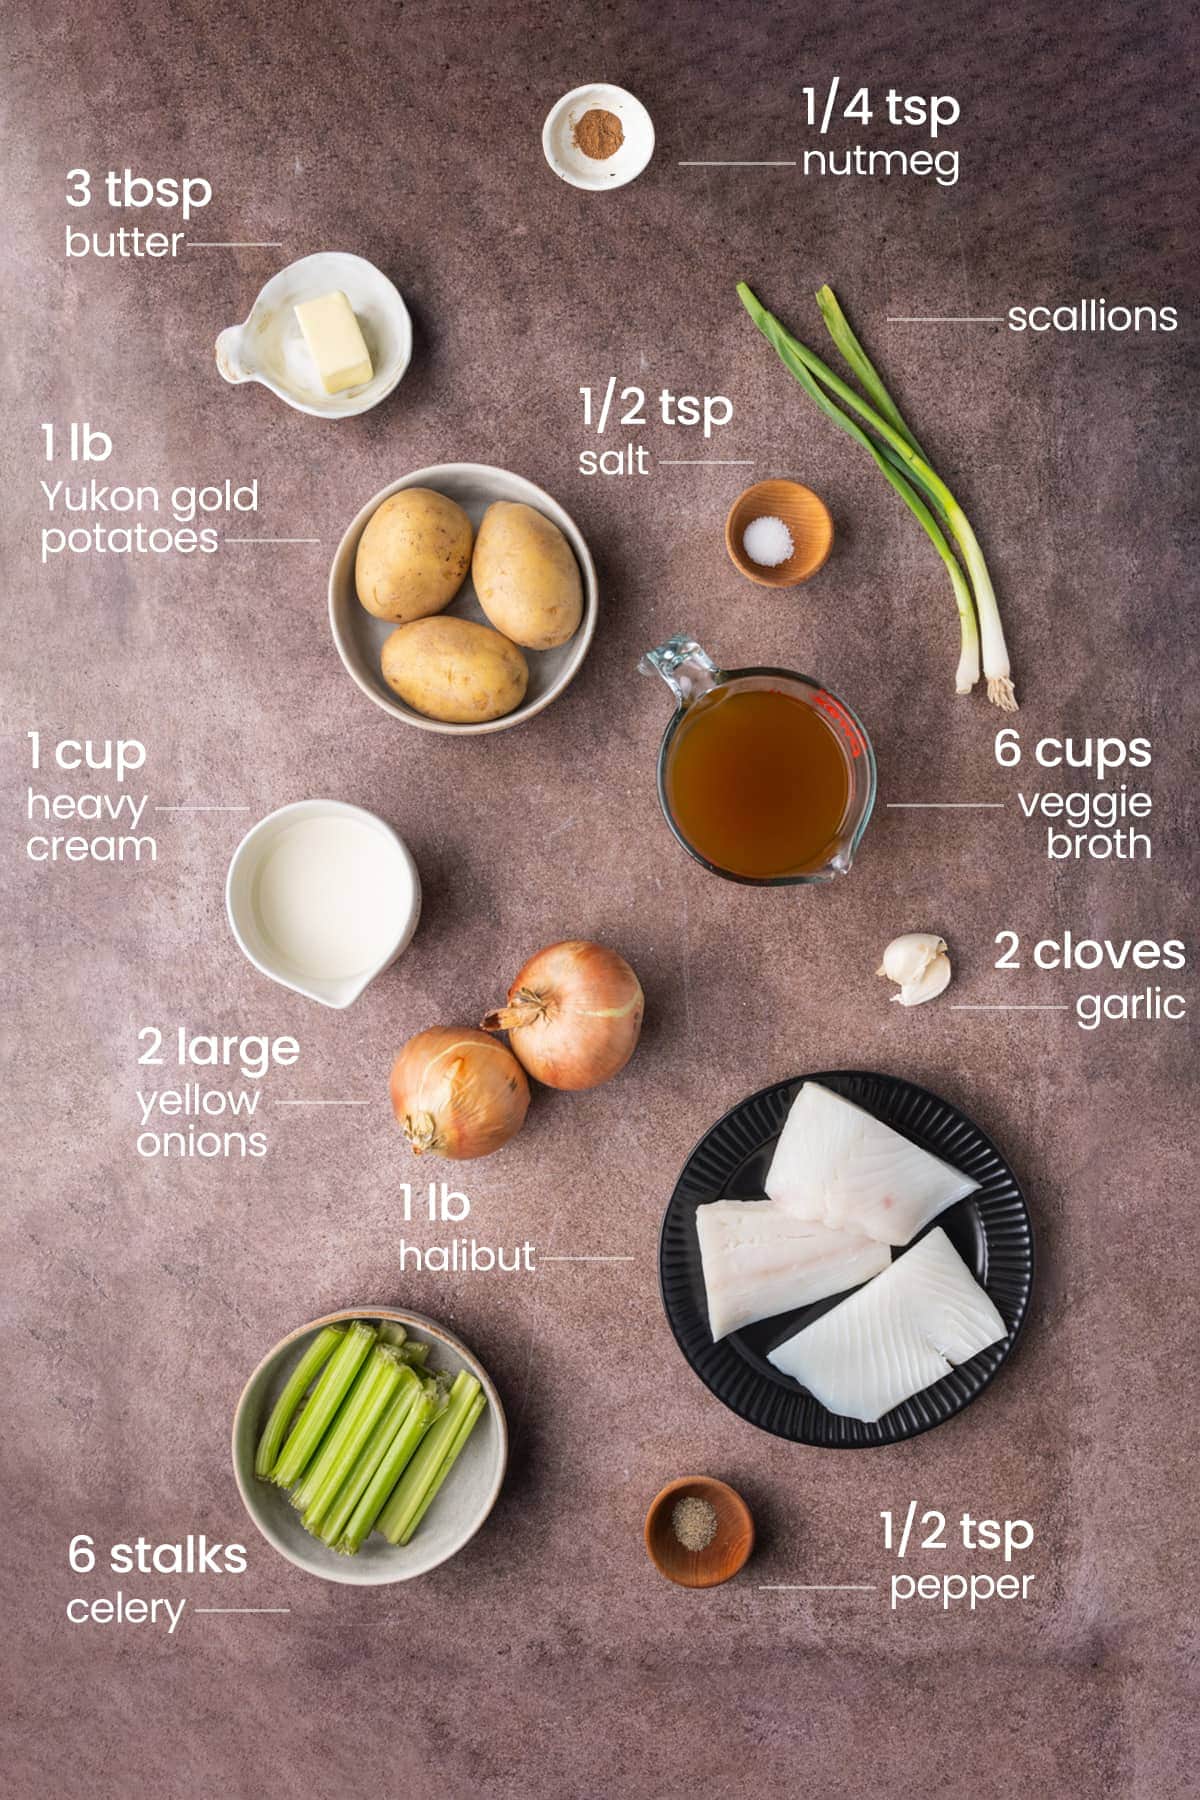 All ingredients needed for halibut chowder including nutmeg, butter, salt, scallions, yukon gold potatoes, vegetable broth, yellow onion, cream, garlic, halibut, pepper, and celery. 